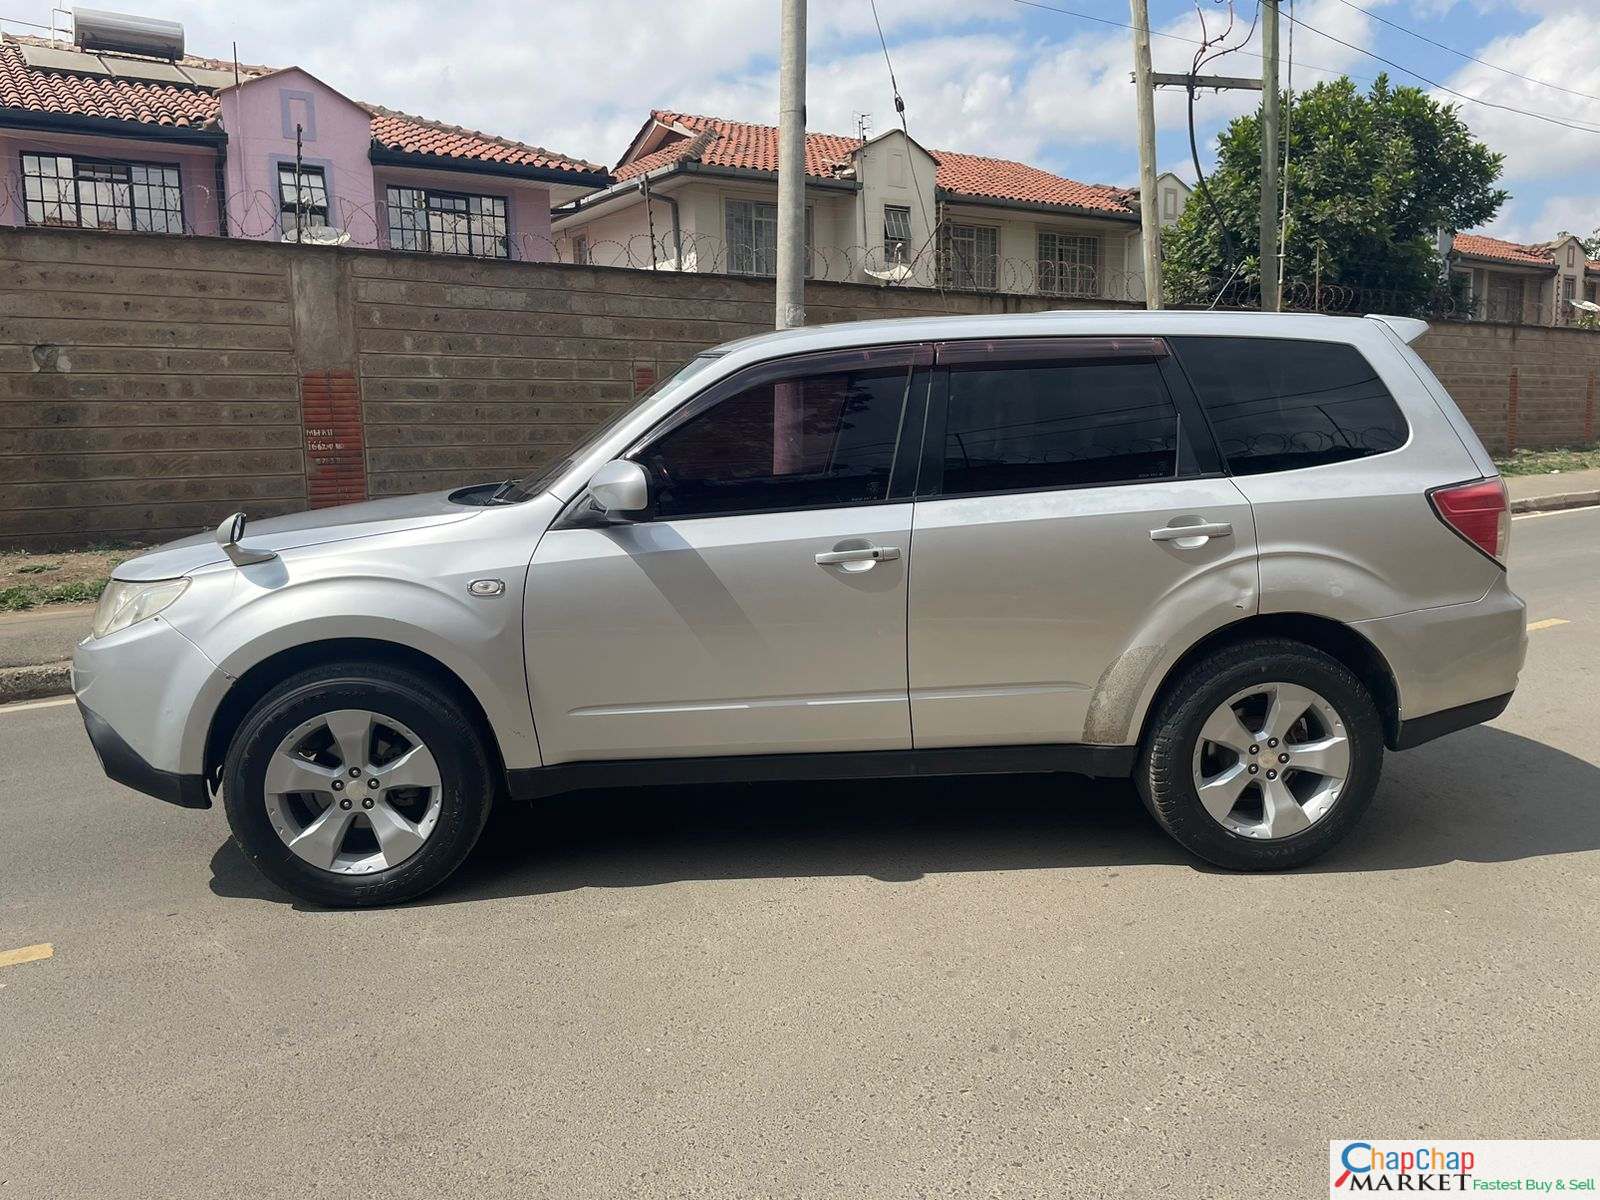 Subaru Forester Turbo MANUAL for sale in Kenya Pay % deposit Trade in Ok EXCLUSIVE